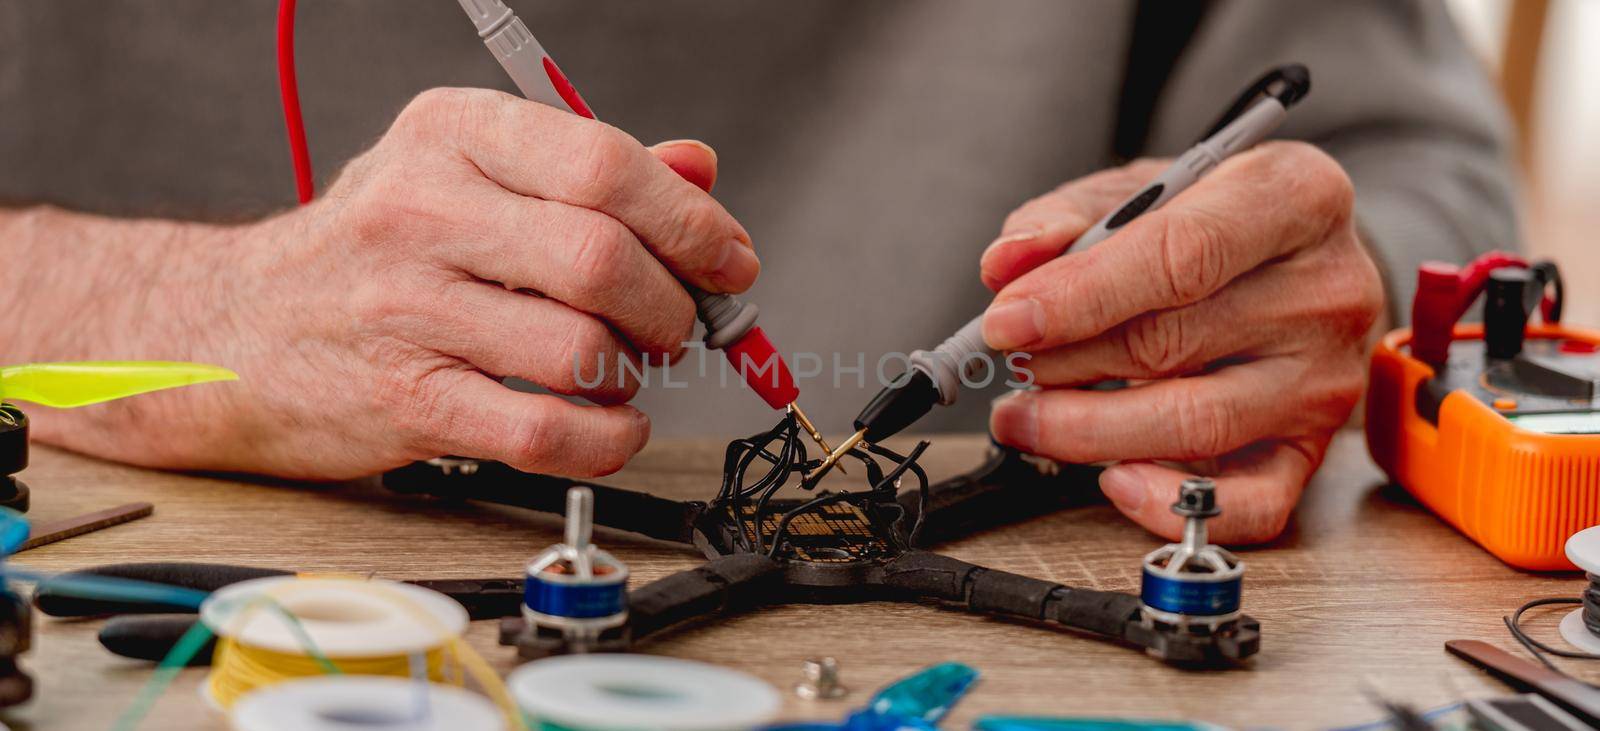 Closeup view of cheking recharge on quadcopter wires during repairing process